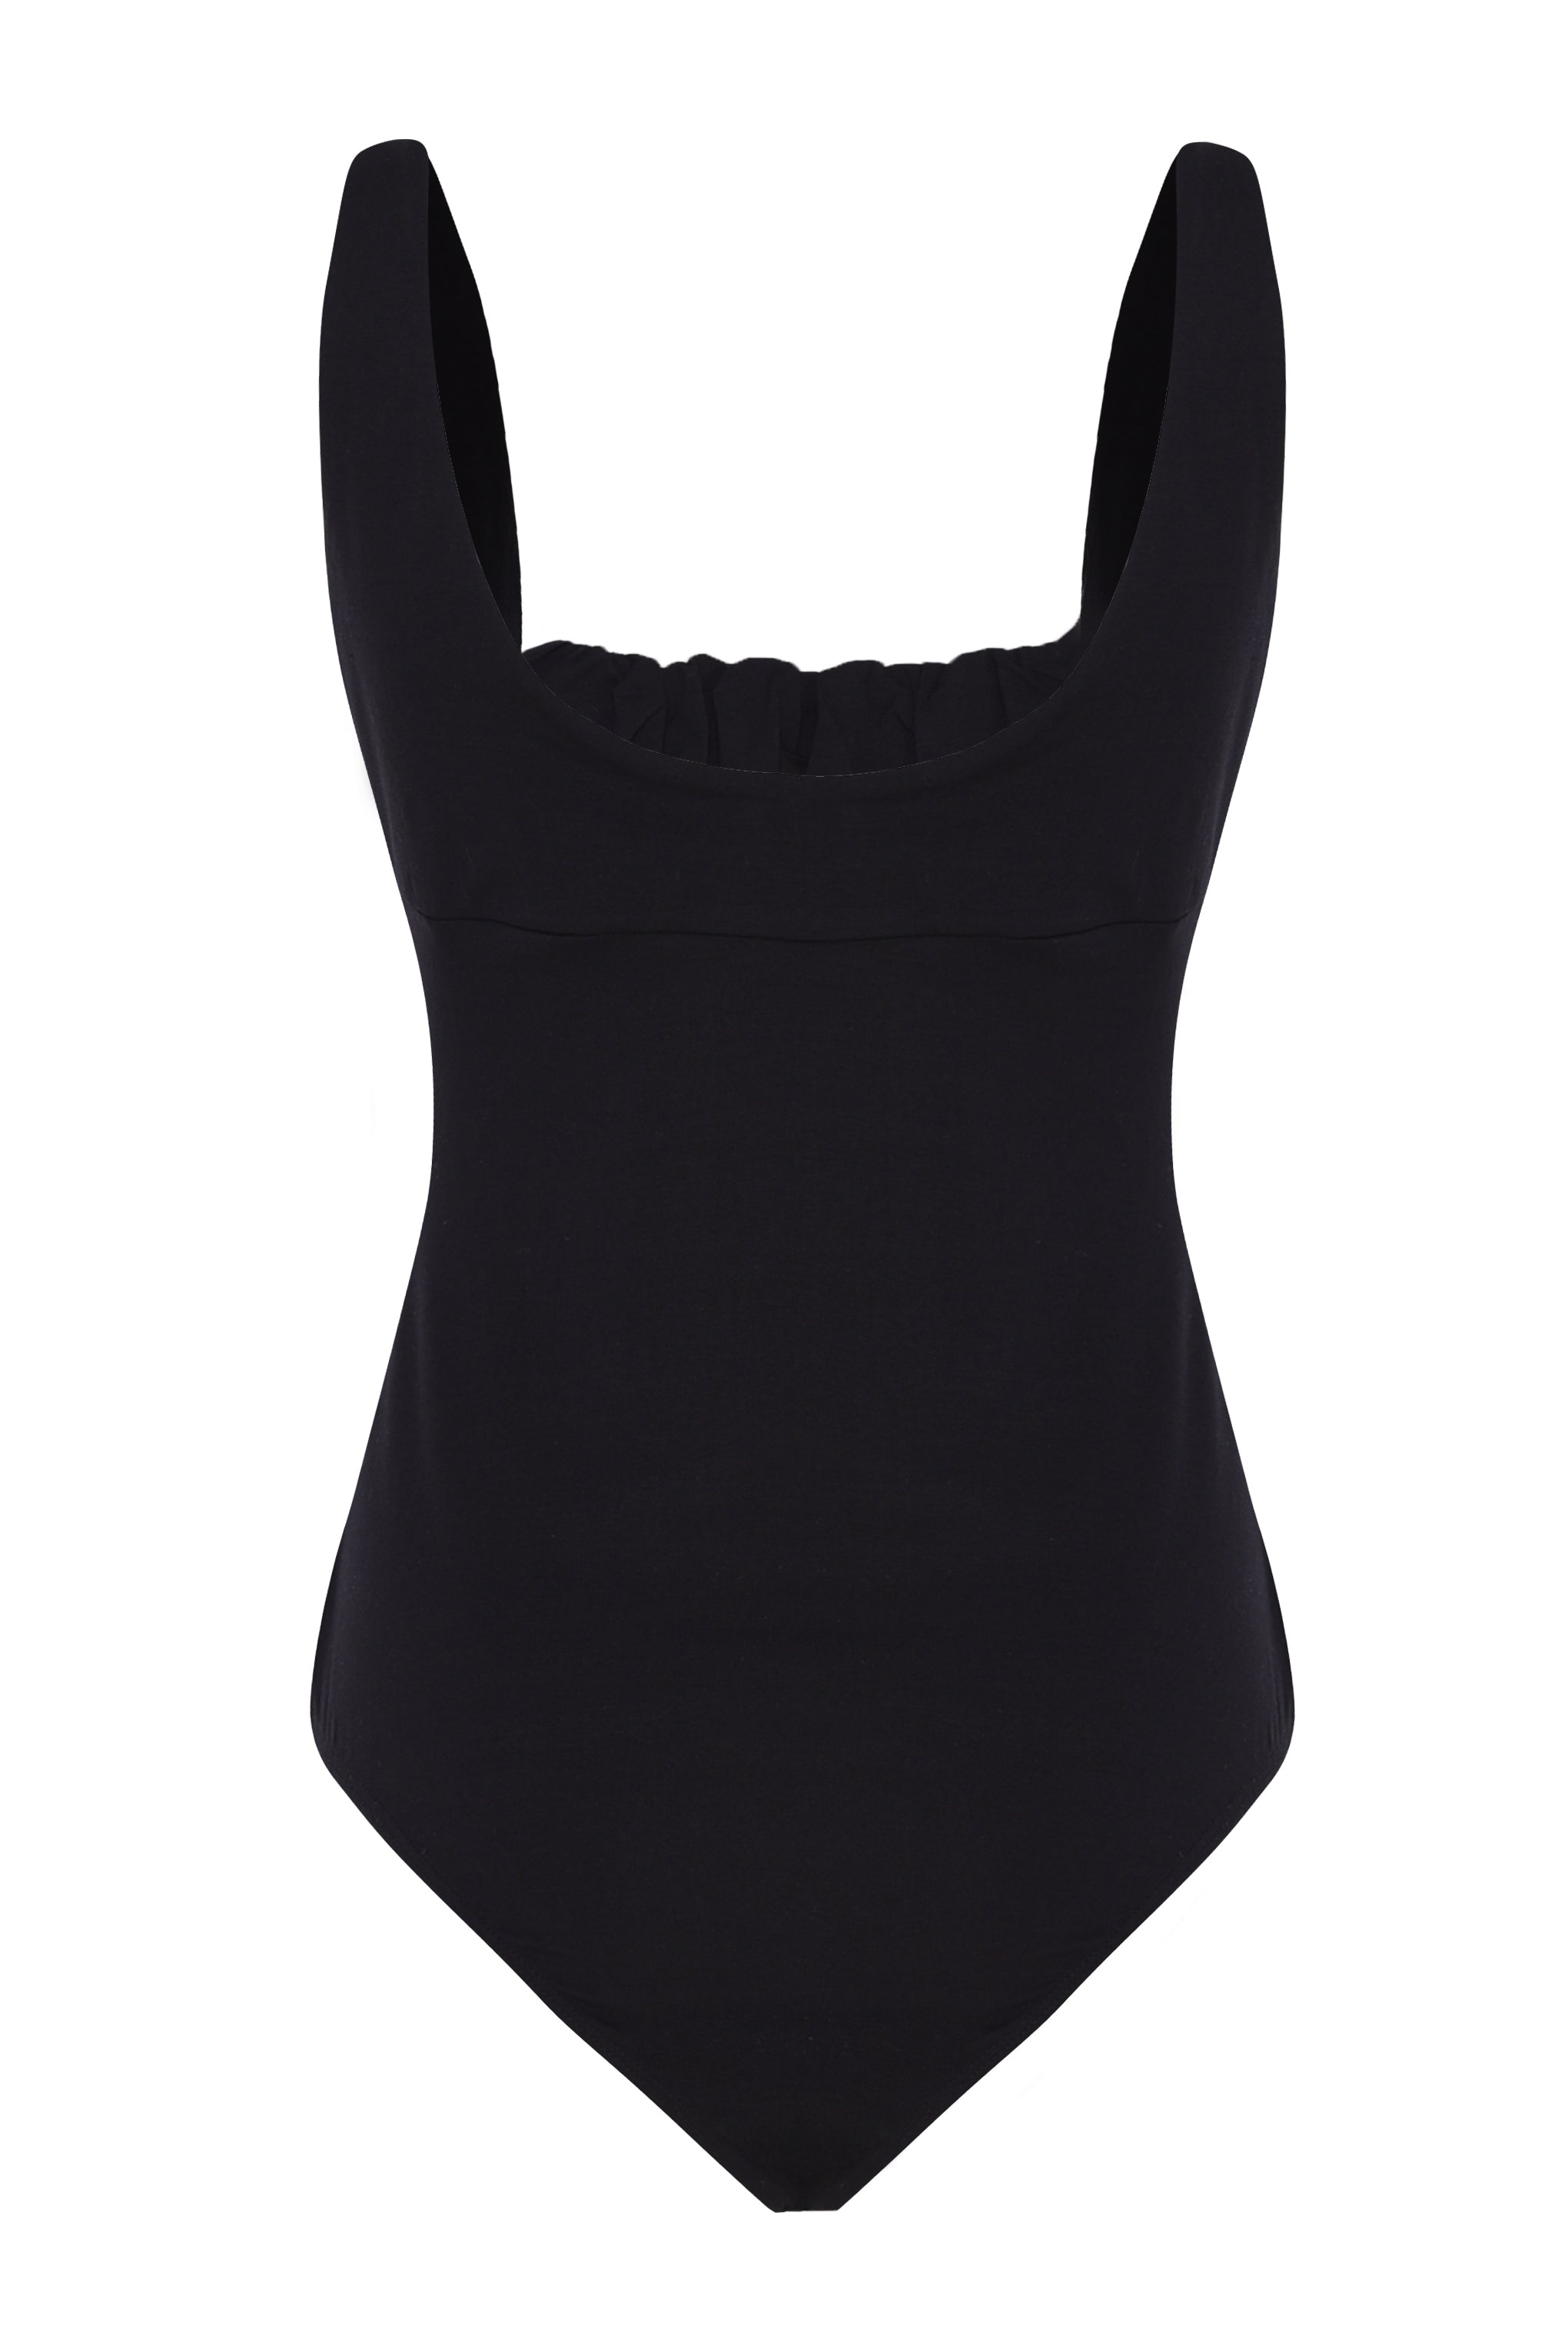 Glamorous Black Ruched Front Body Suit